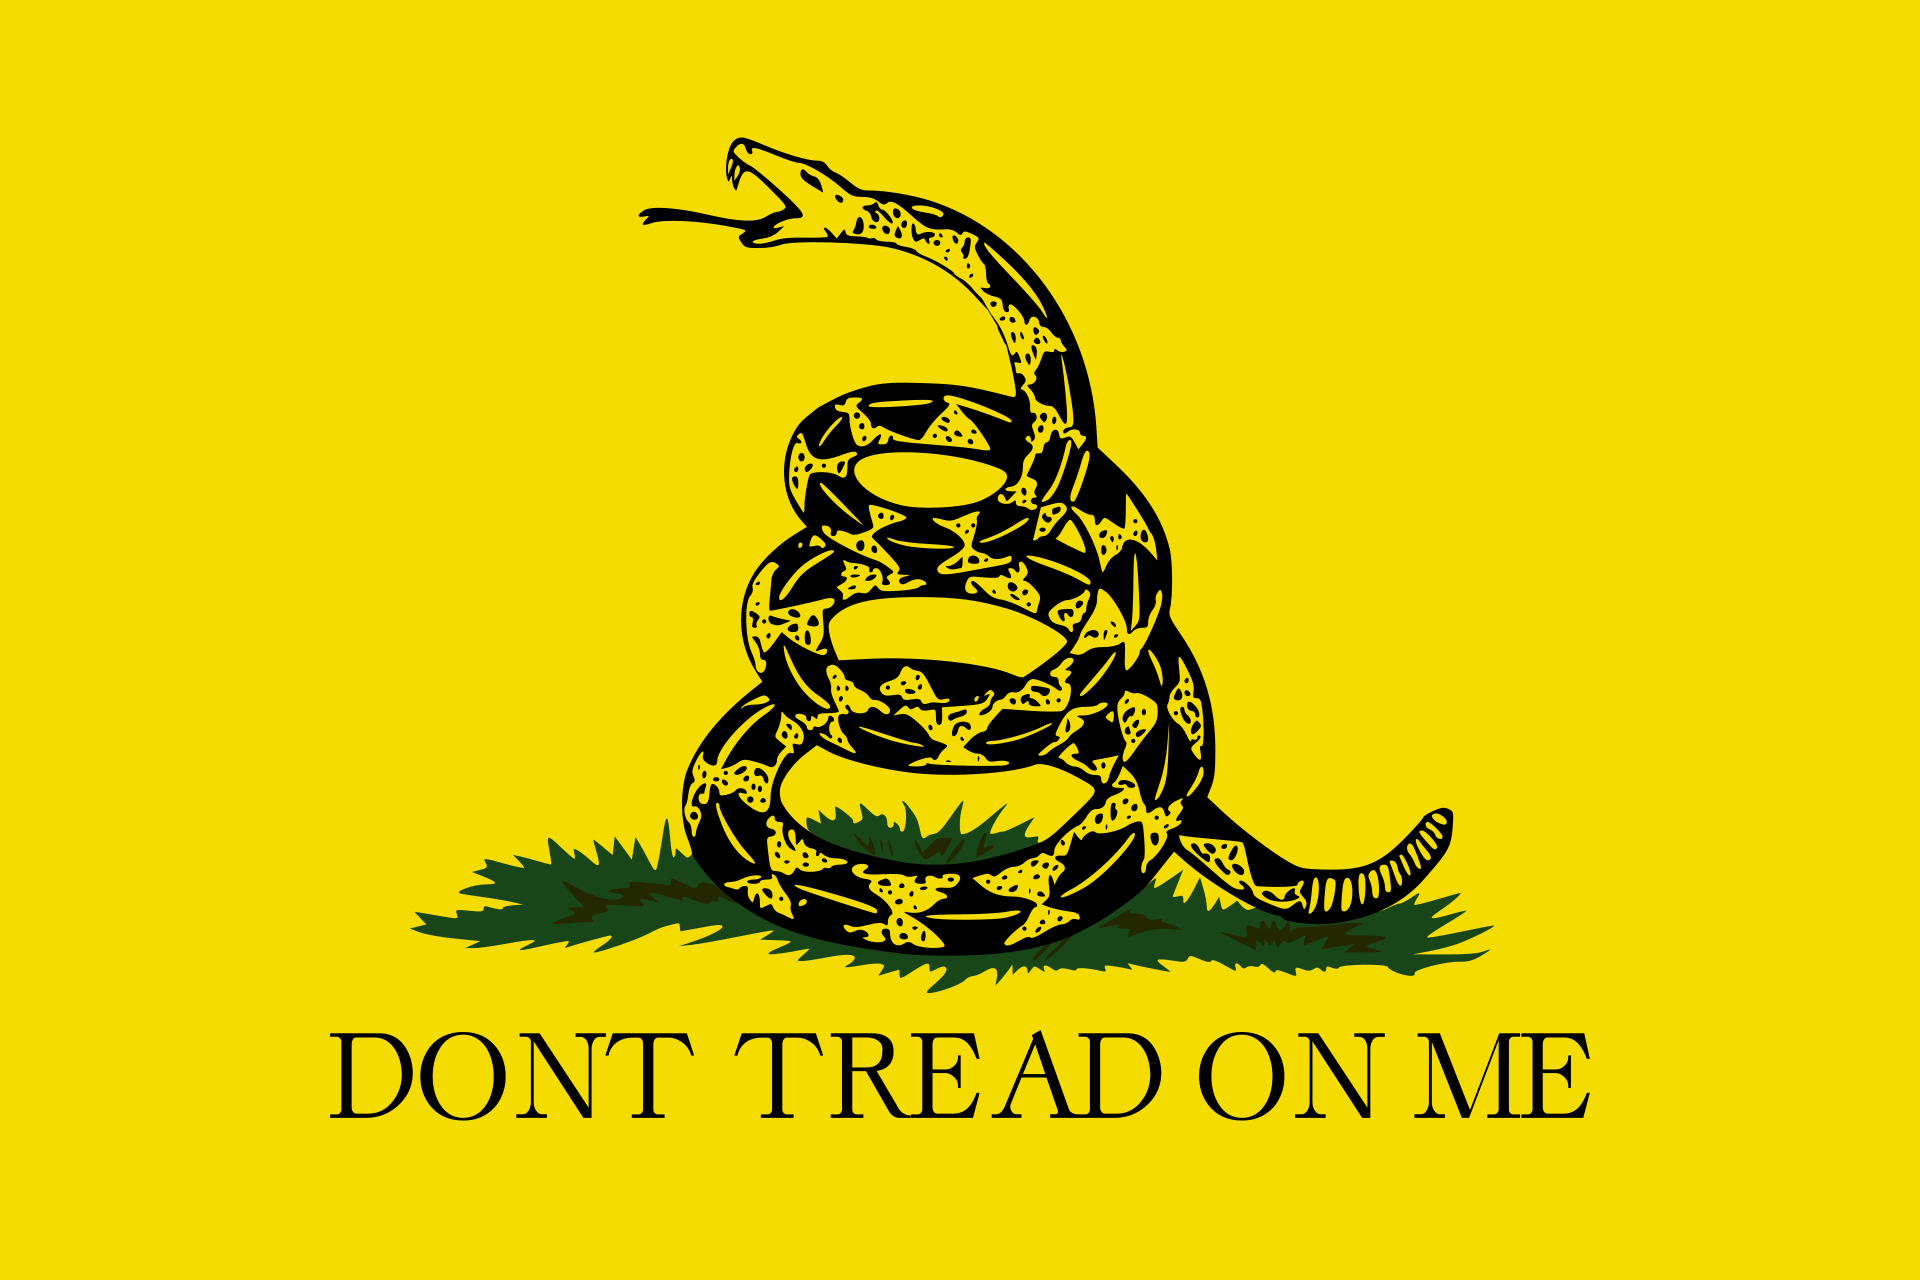 https://www.dictionary.com/e/wp-content/uploads/2018/03/dont-tread-on-me.png